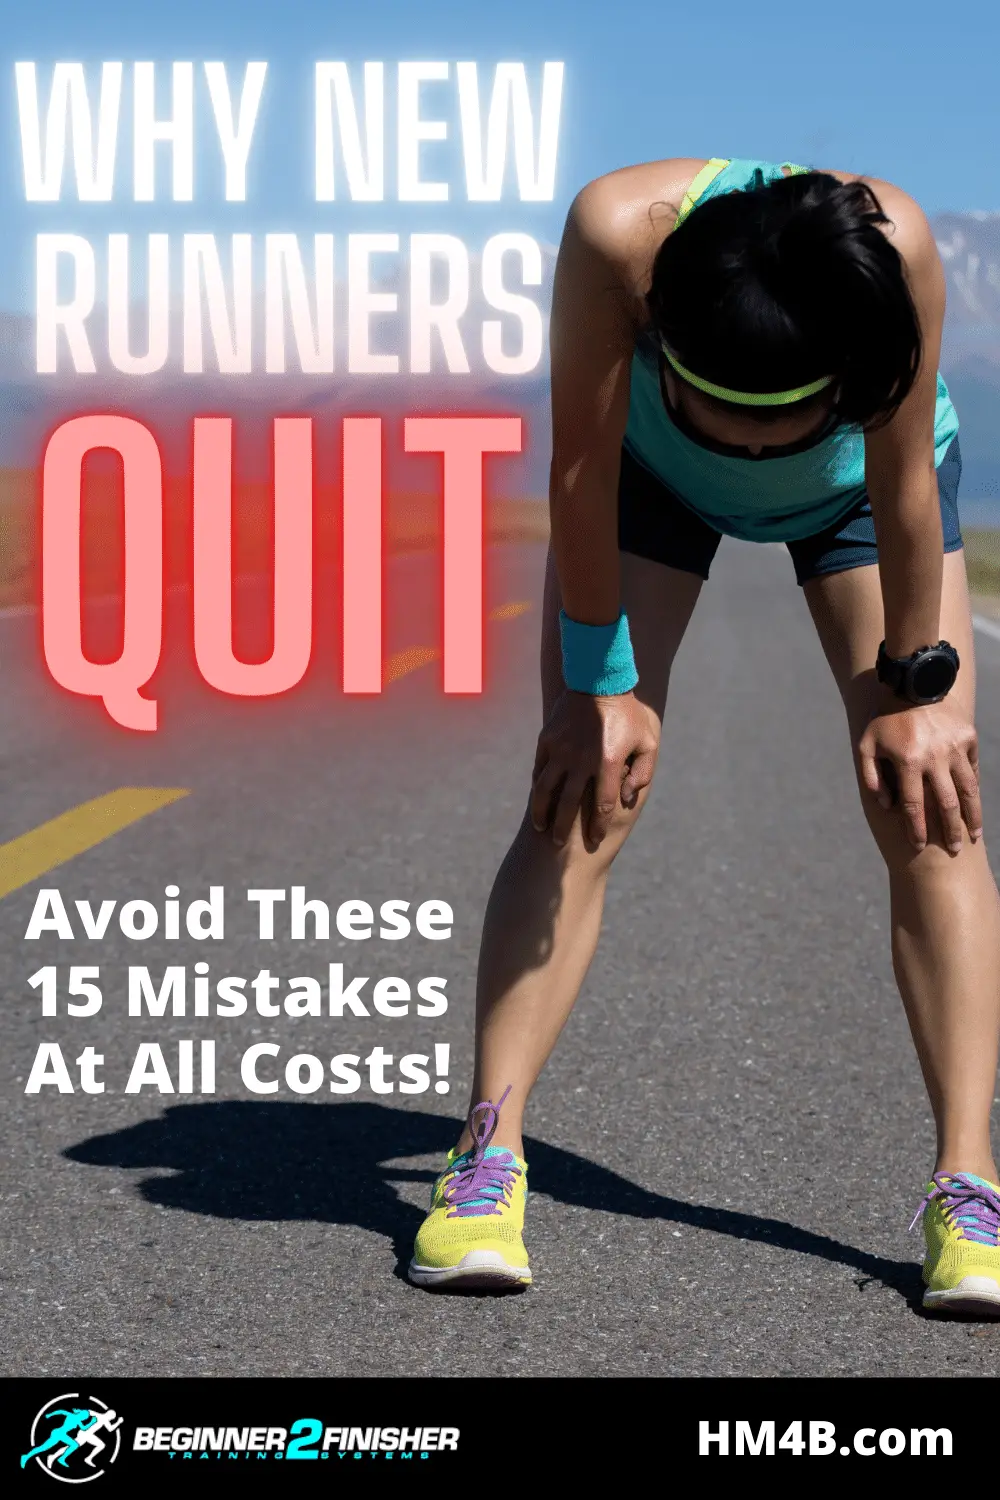 Why New Runners Quit - Avoid These 15 Mistakes At All Costs!